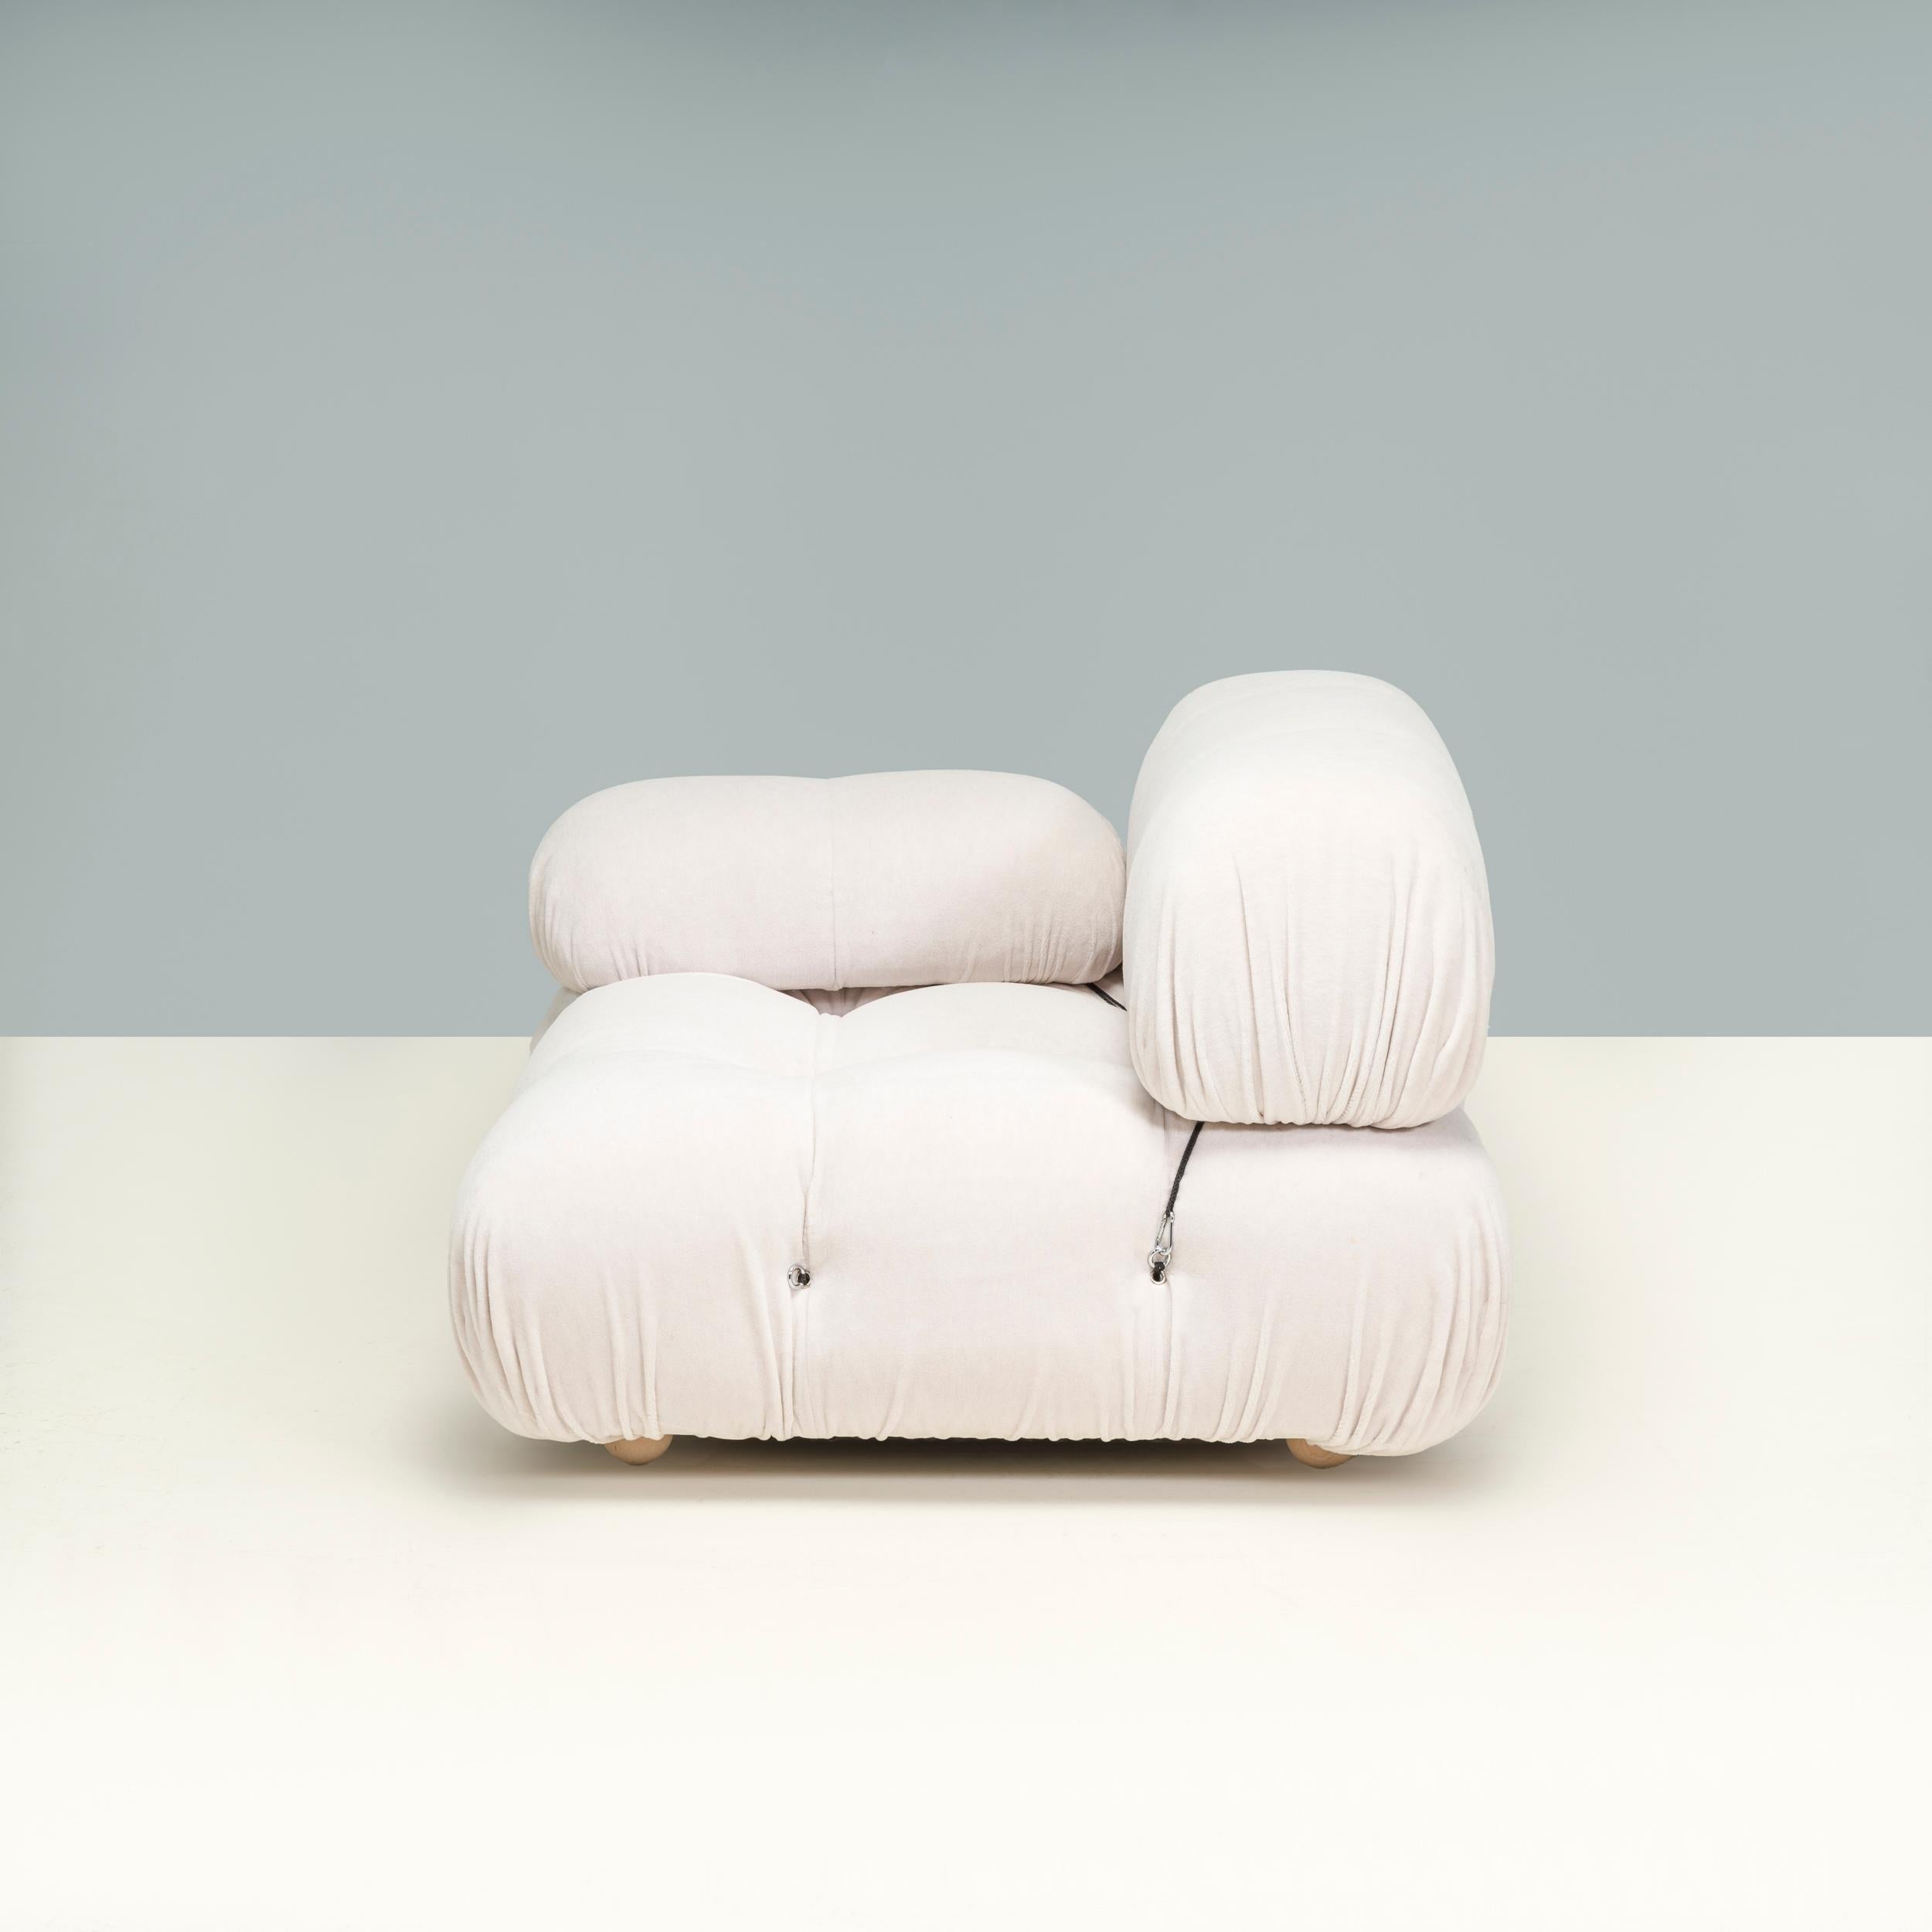 Originally designed by Mario Bellini in 1972 for the Museum of Modern Art exhibition ‘Italy: The New Domestic Landscape’, the Camaleonda was manufactured by B&B Italia for 5 years until 1979. 

Since then the Camaleonda sofa has become a design icon